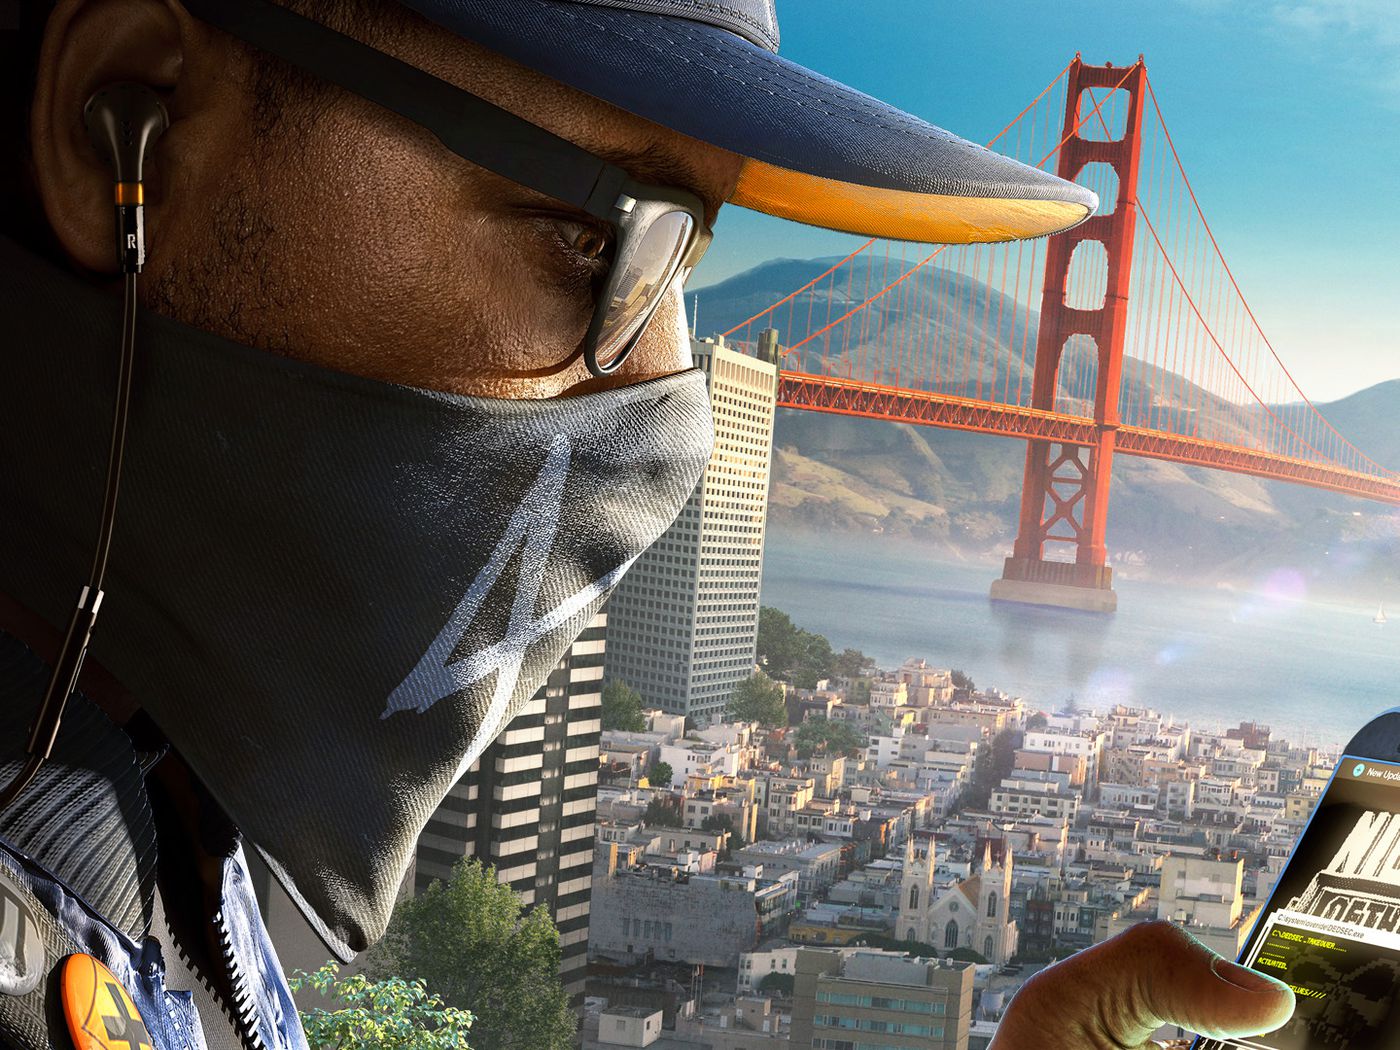 danielle burruss recommends watch dogs 2 vagina pic pic